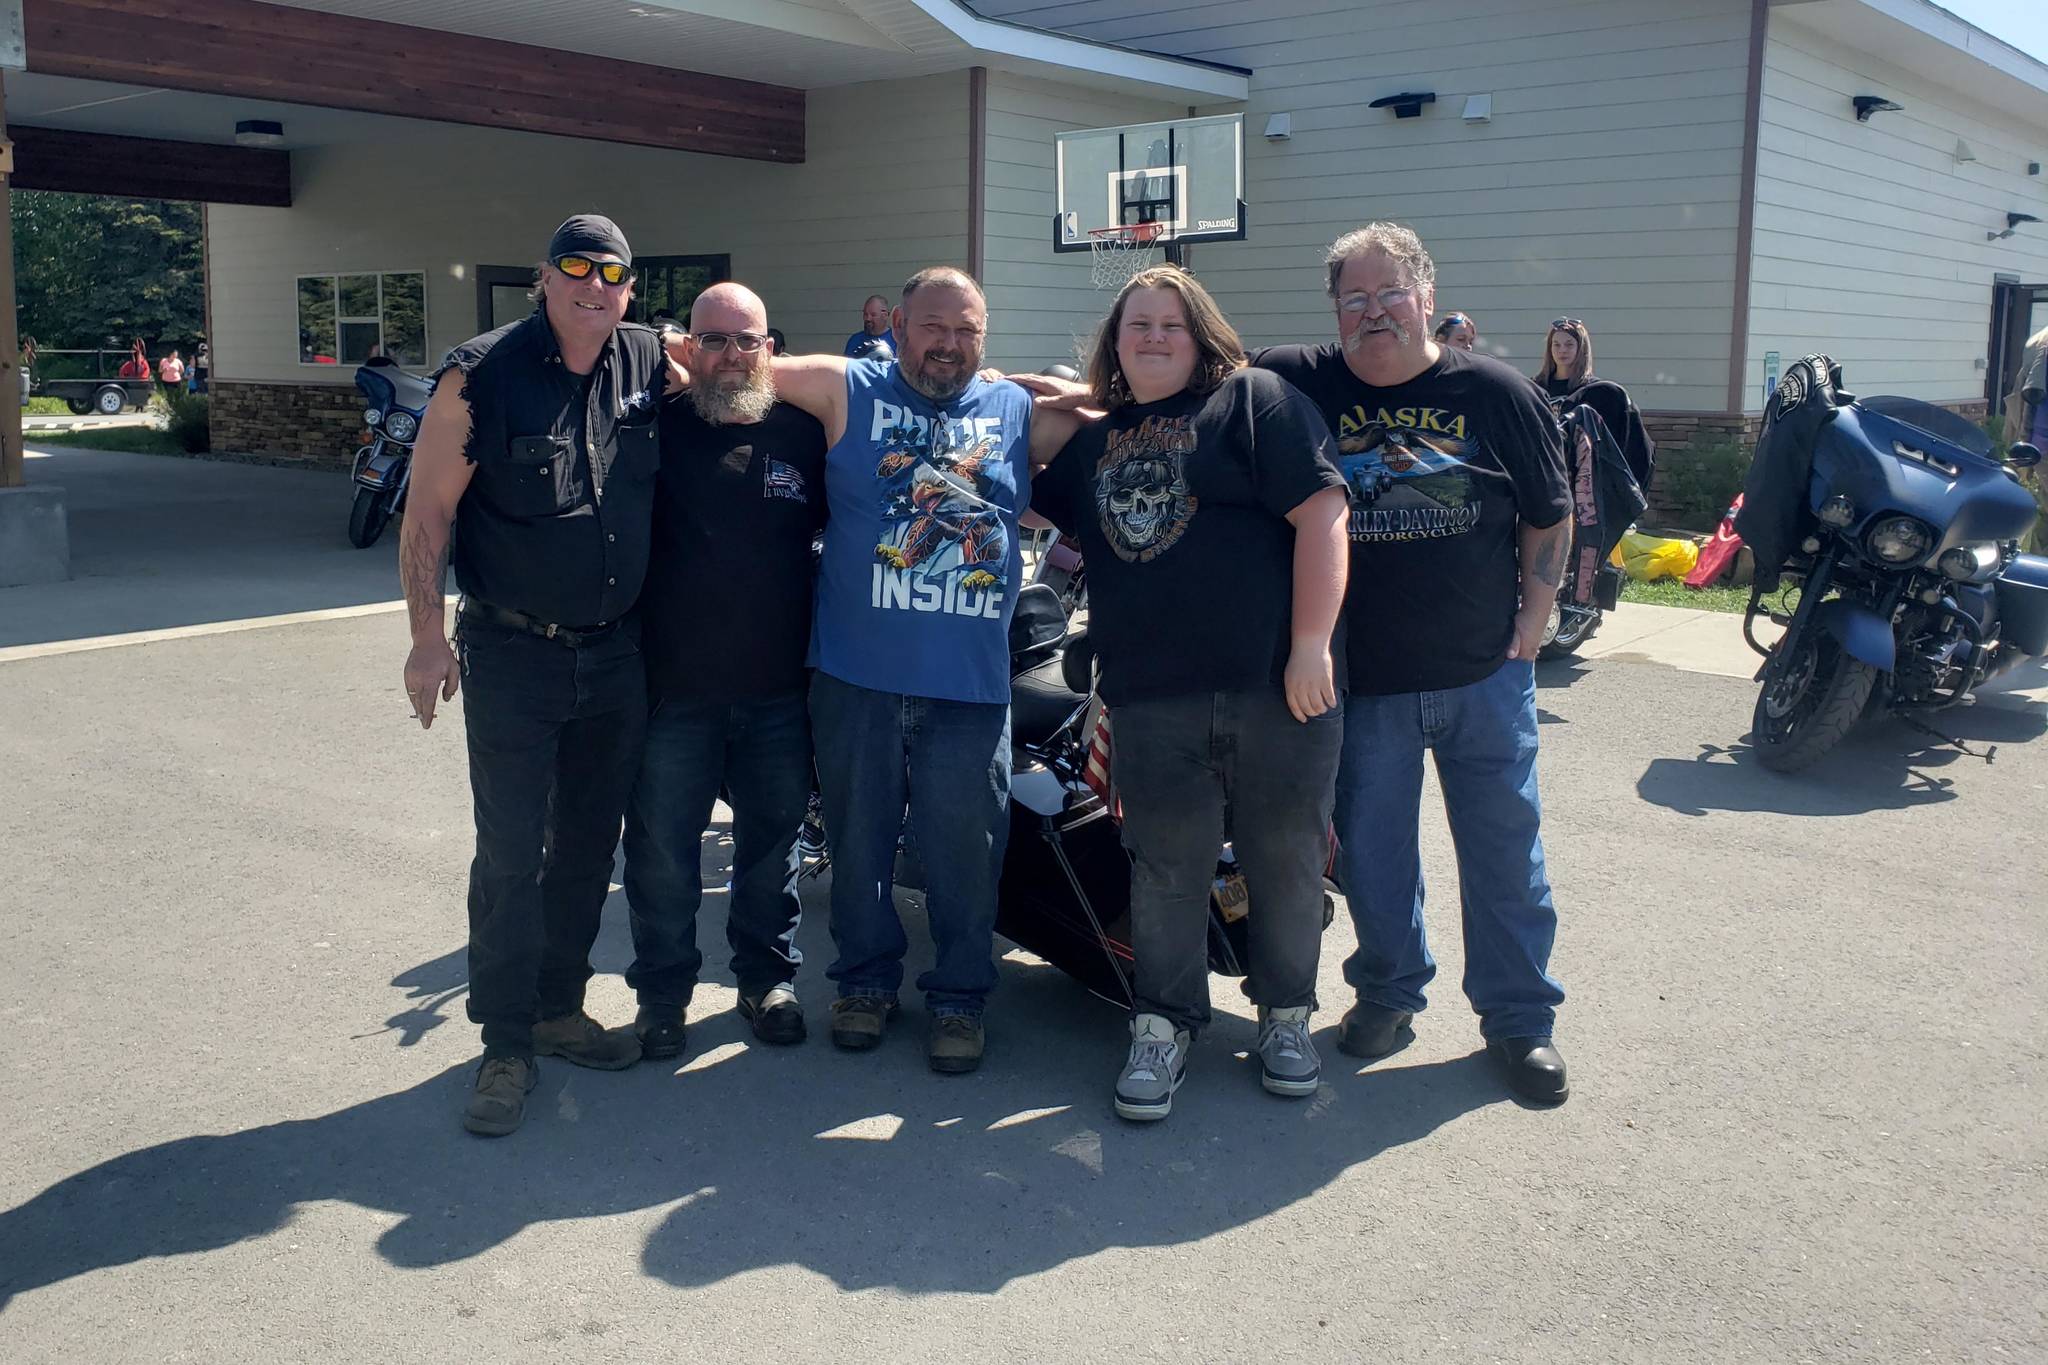 From left, Brad Conklin, Jeremy Gill, Kyle Lee, Owen Winfrey and Jerry Winfrey pose for a photo at Hope Community Resources in Soldotna, Alaska, during the First Annual Ride for Suicide Awareness and Prevention on Sunday, June 23, 2019. (Photo courtesy Kyle Lee)